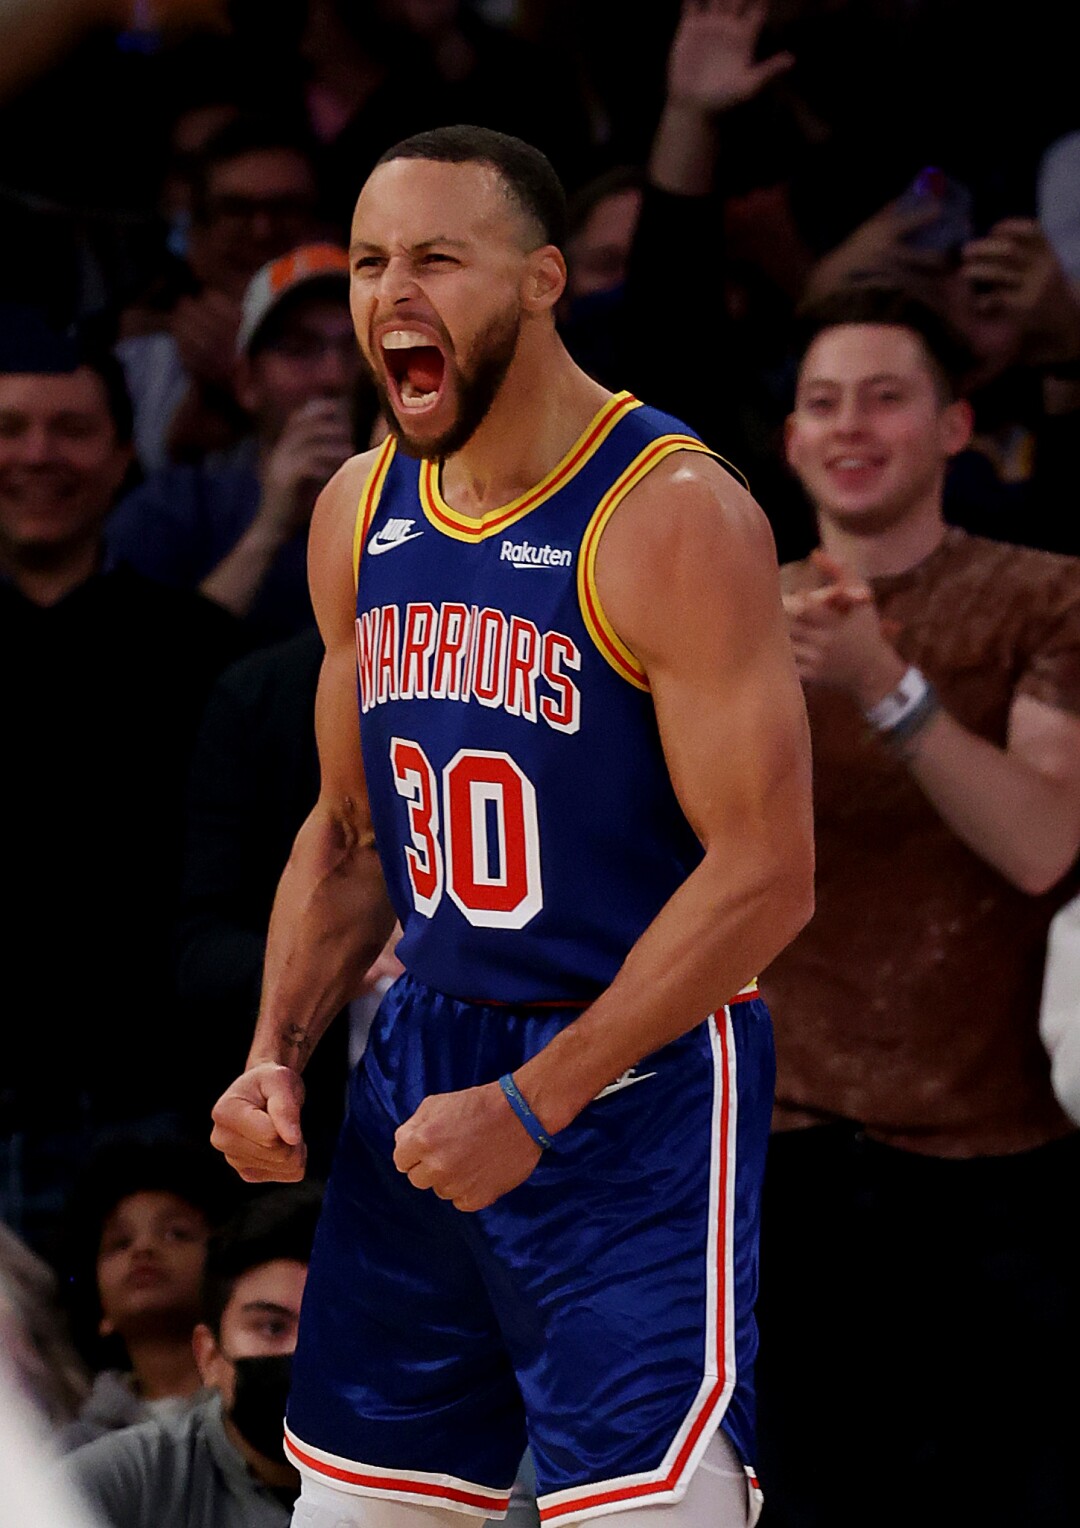 Stephen Curry celebrates after making a three-point basket to break Ray Allen’s record for the most all-time 